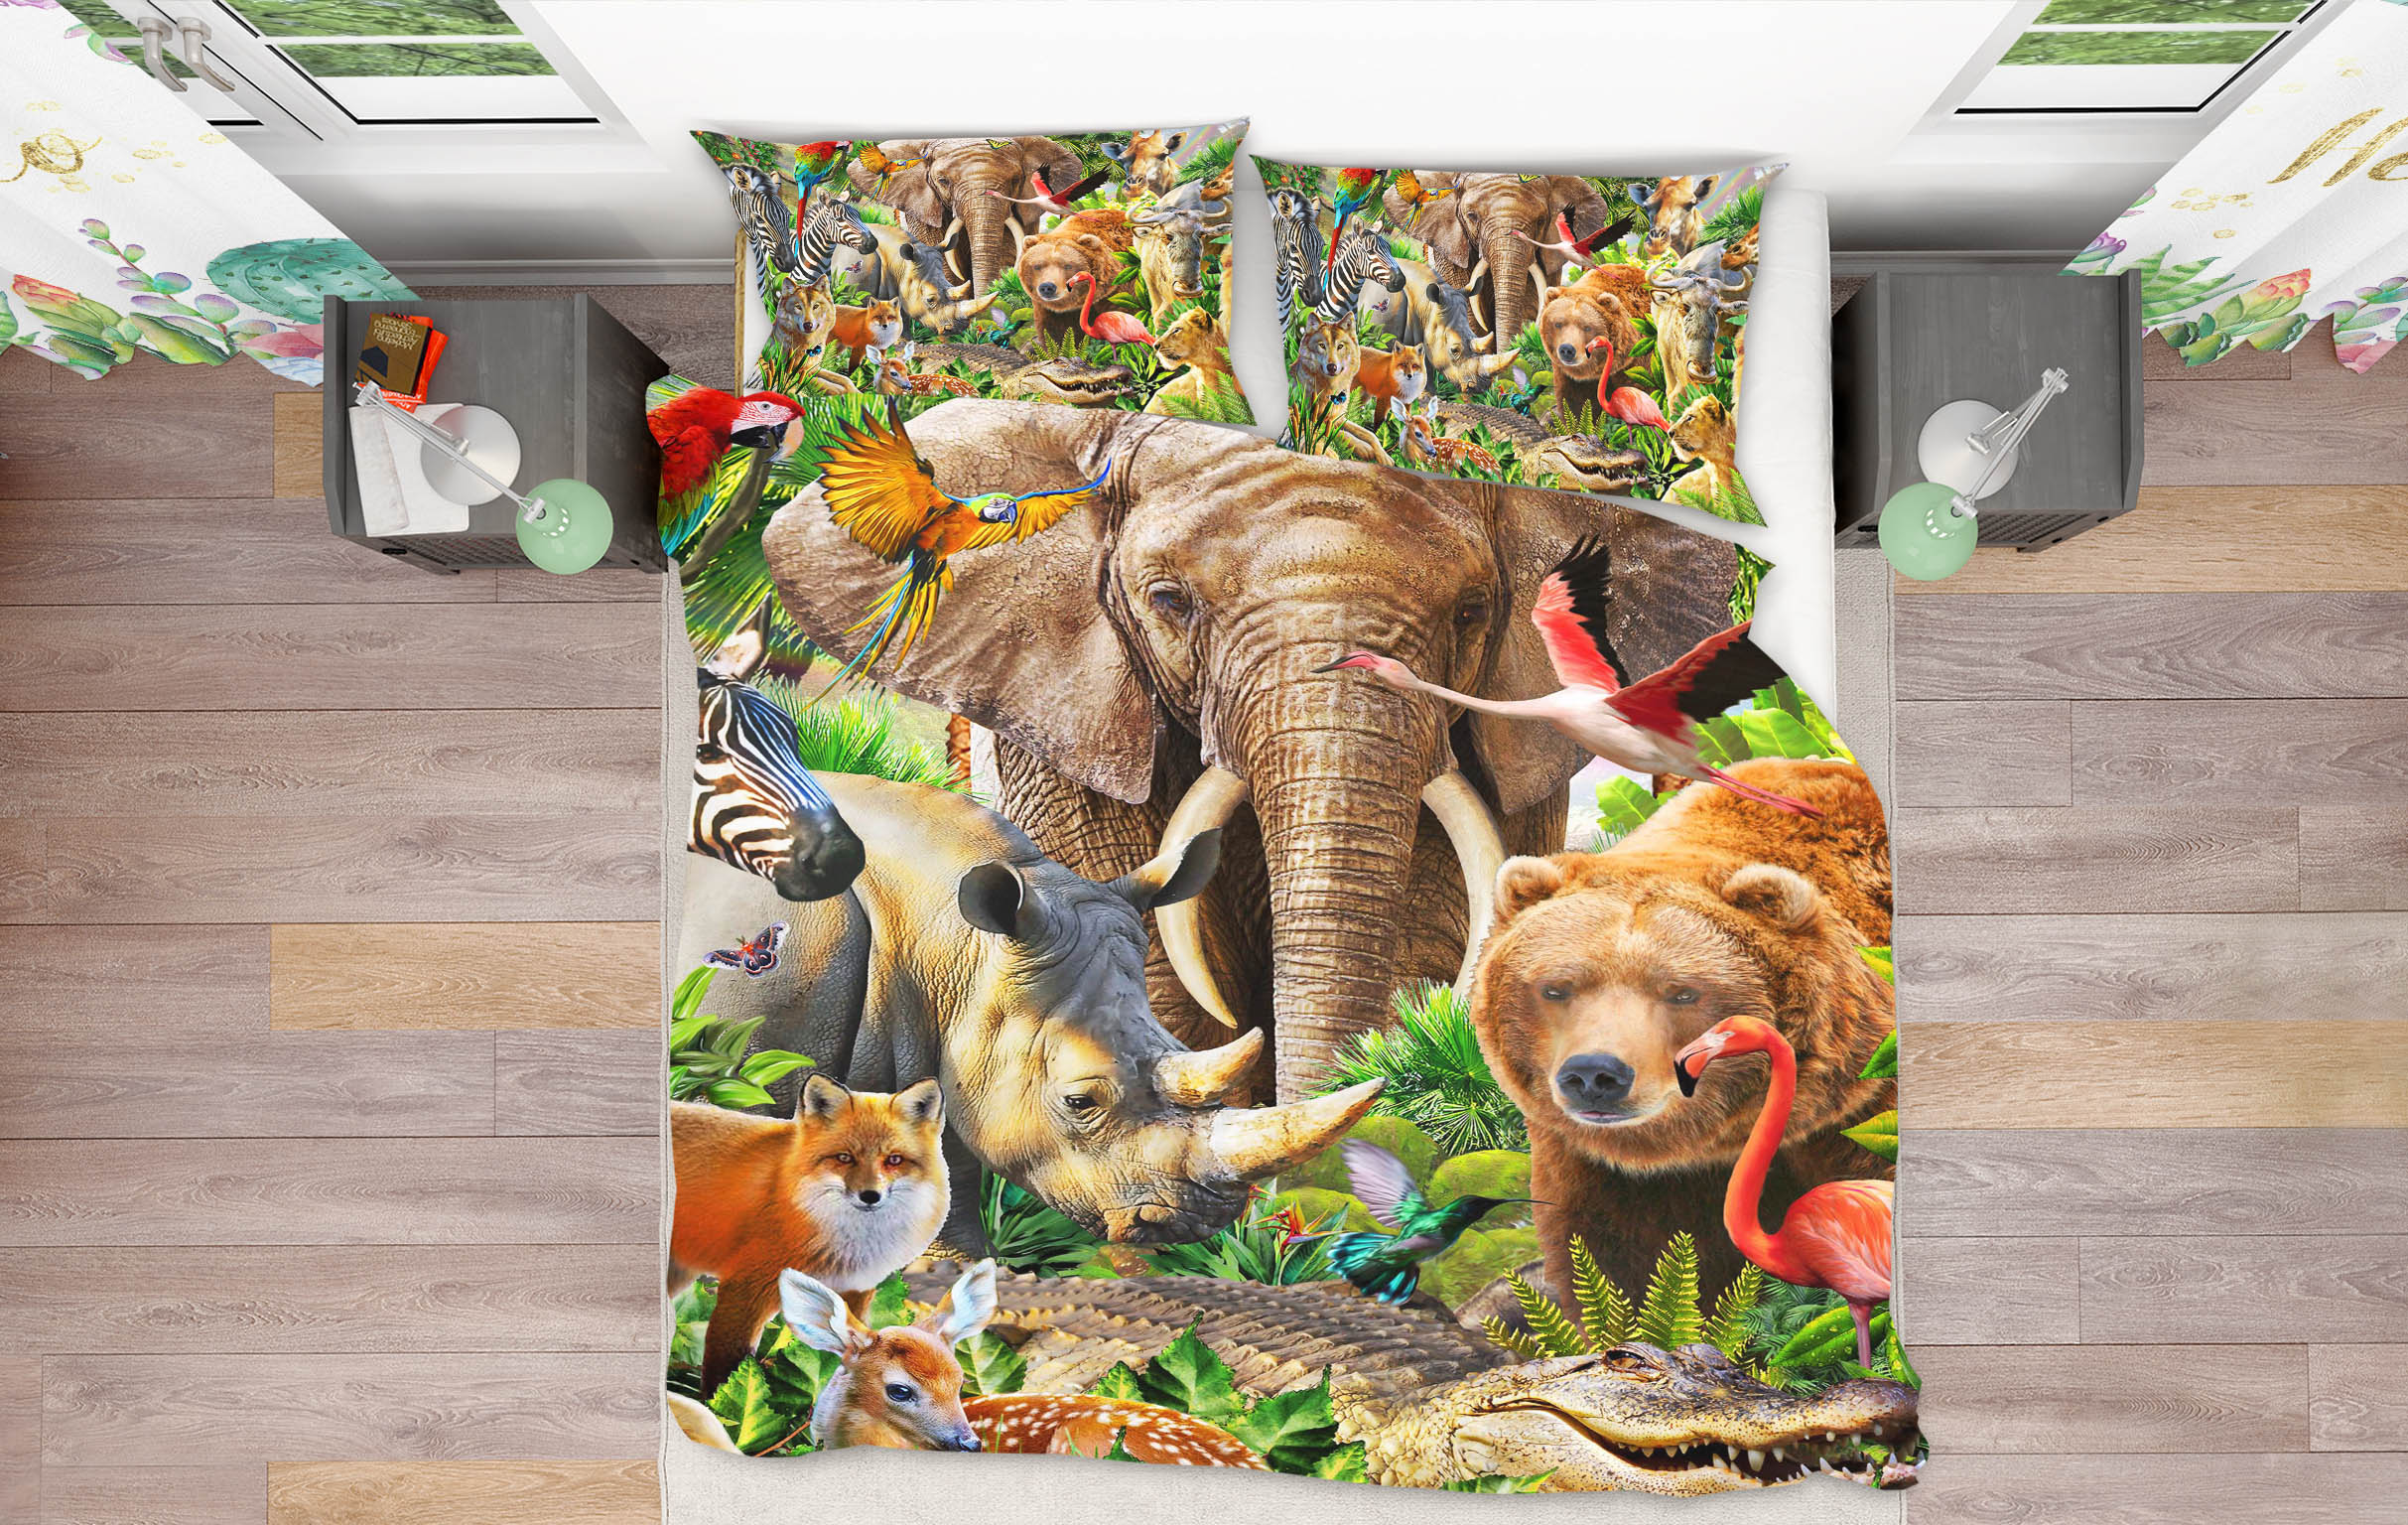 3D Animal World 2049 Adrian Chesterman Bedding Bed Pillowcases Quilt